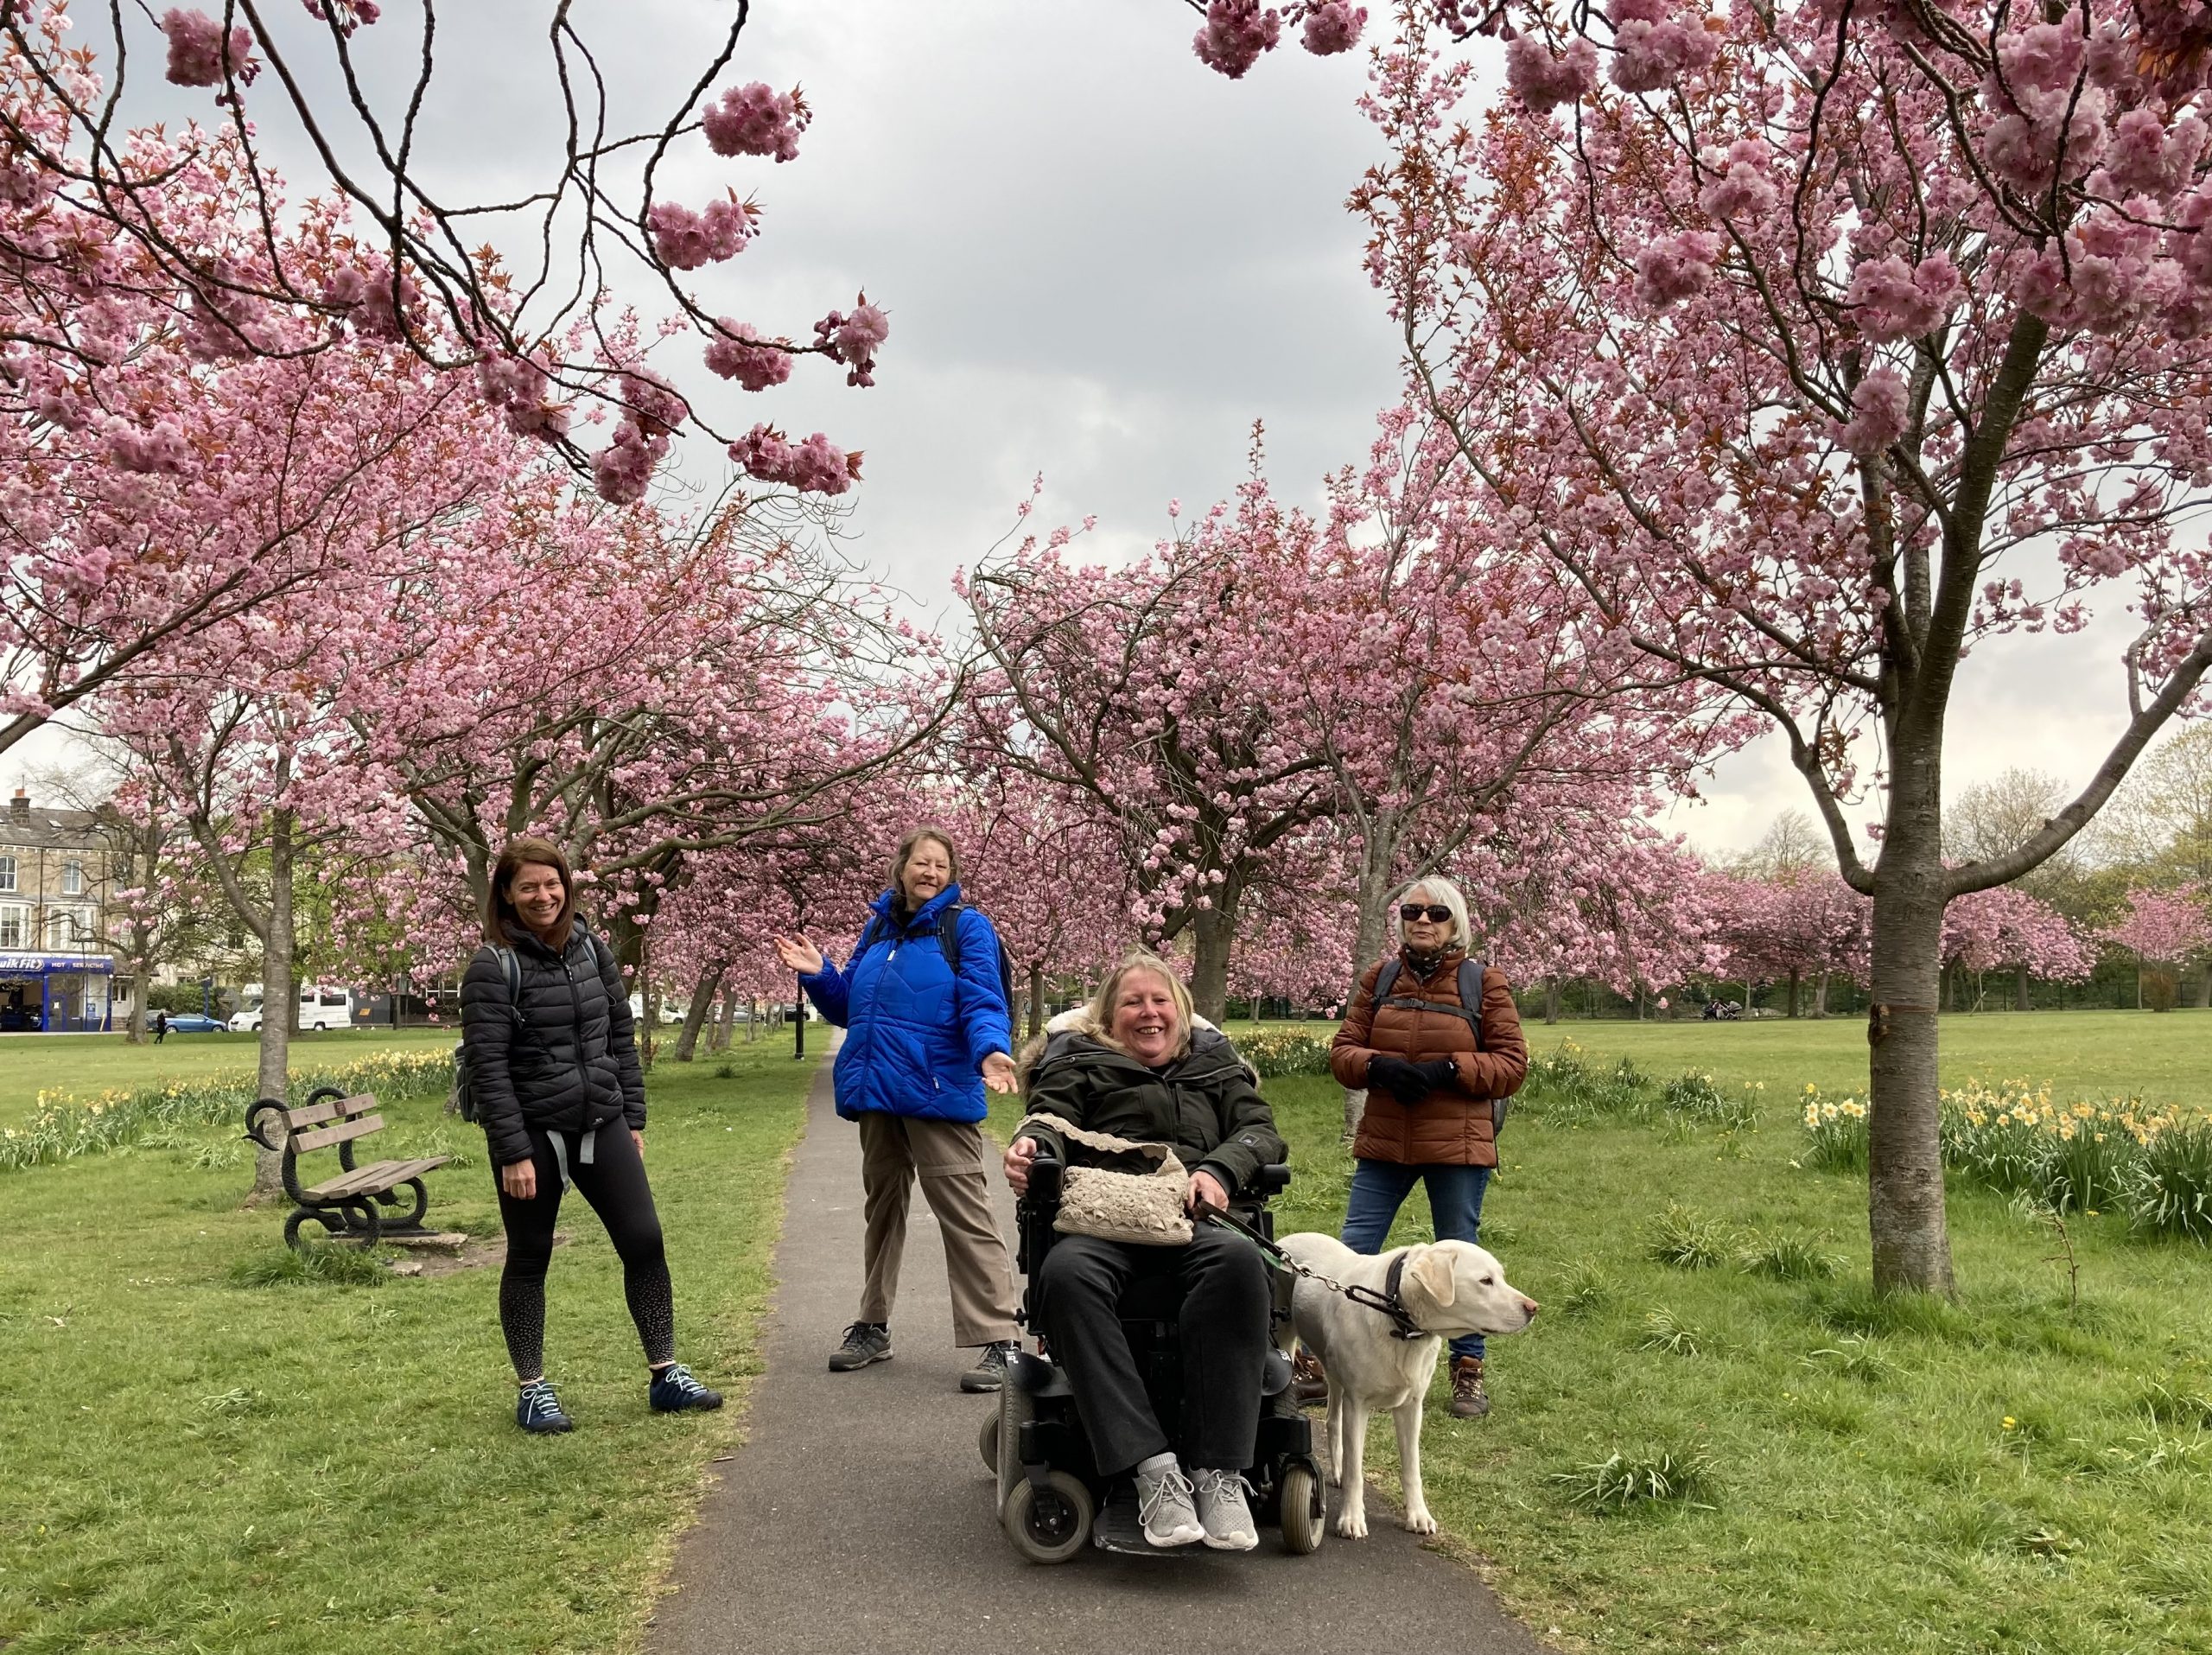 Five people and a dog standing by some cherry trees in blossom